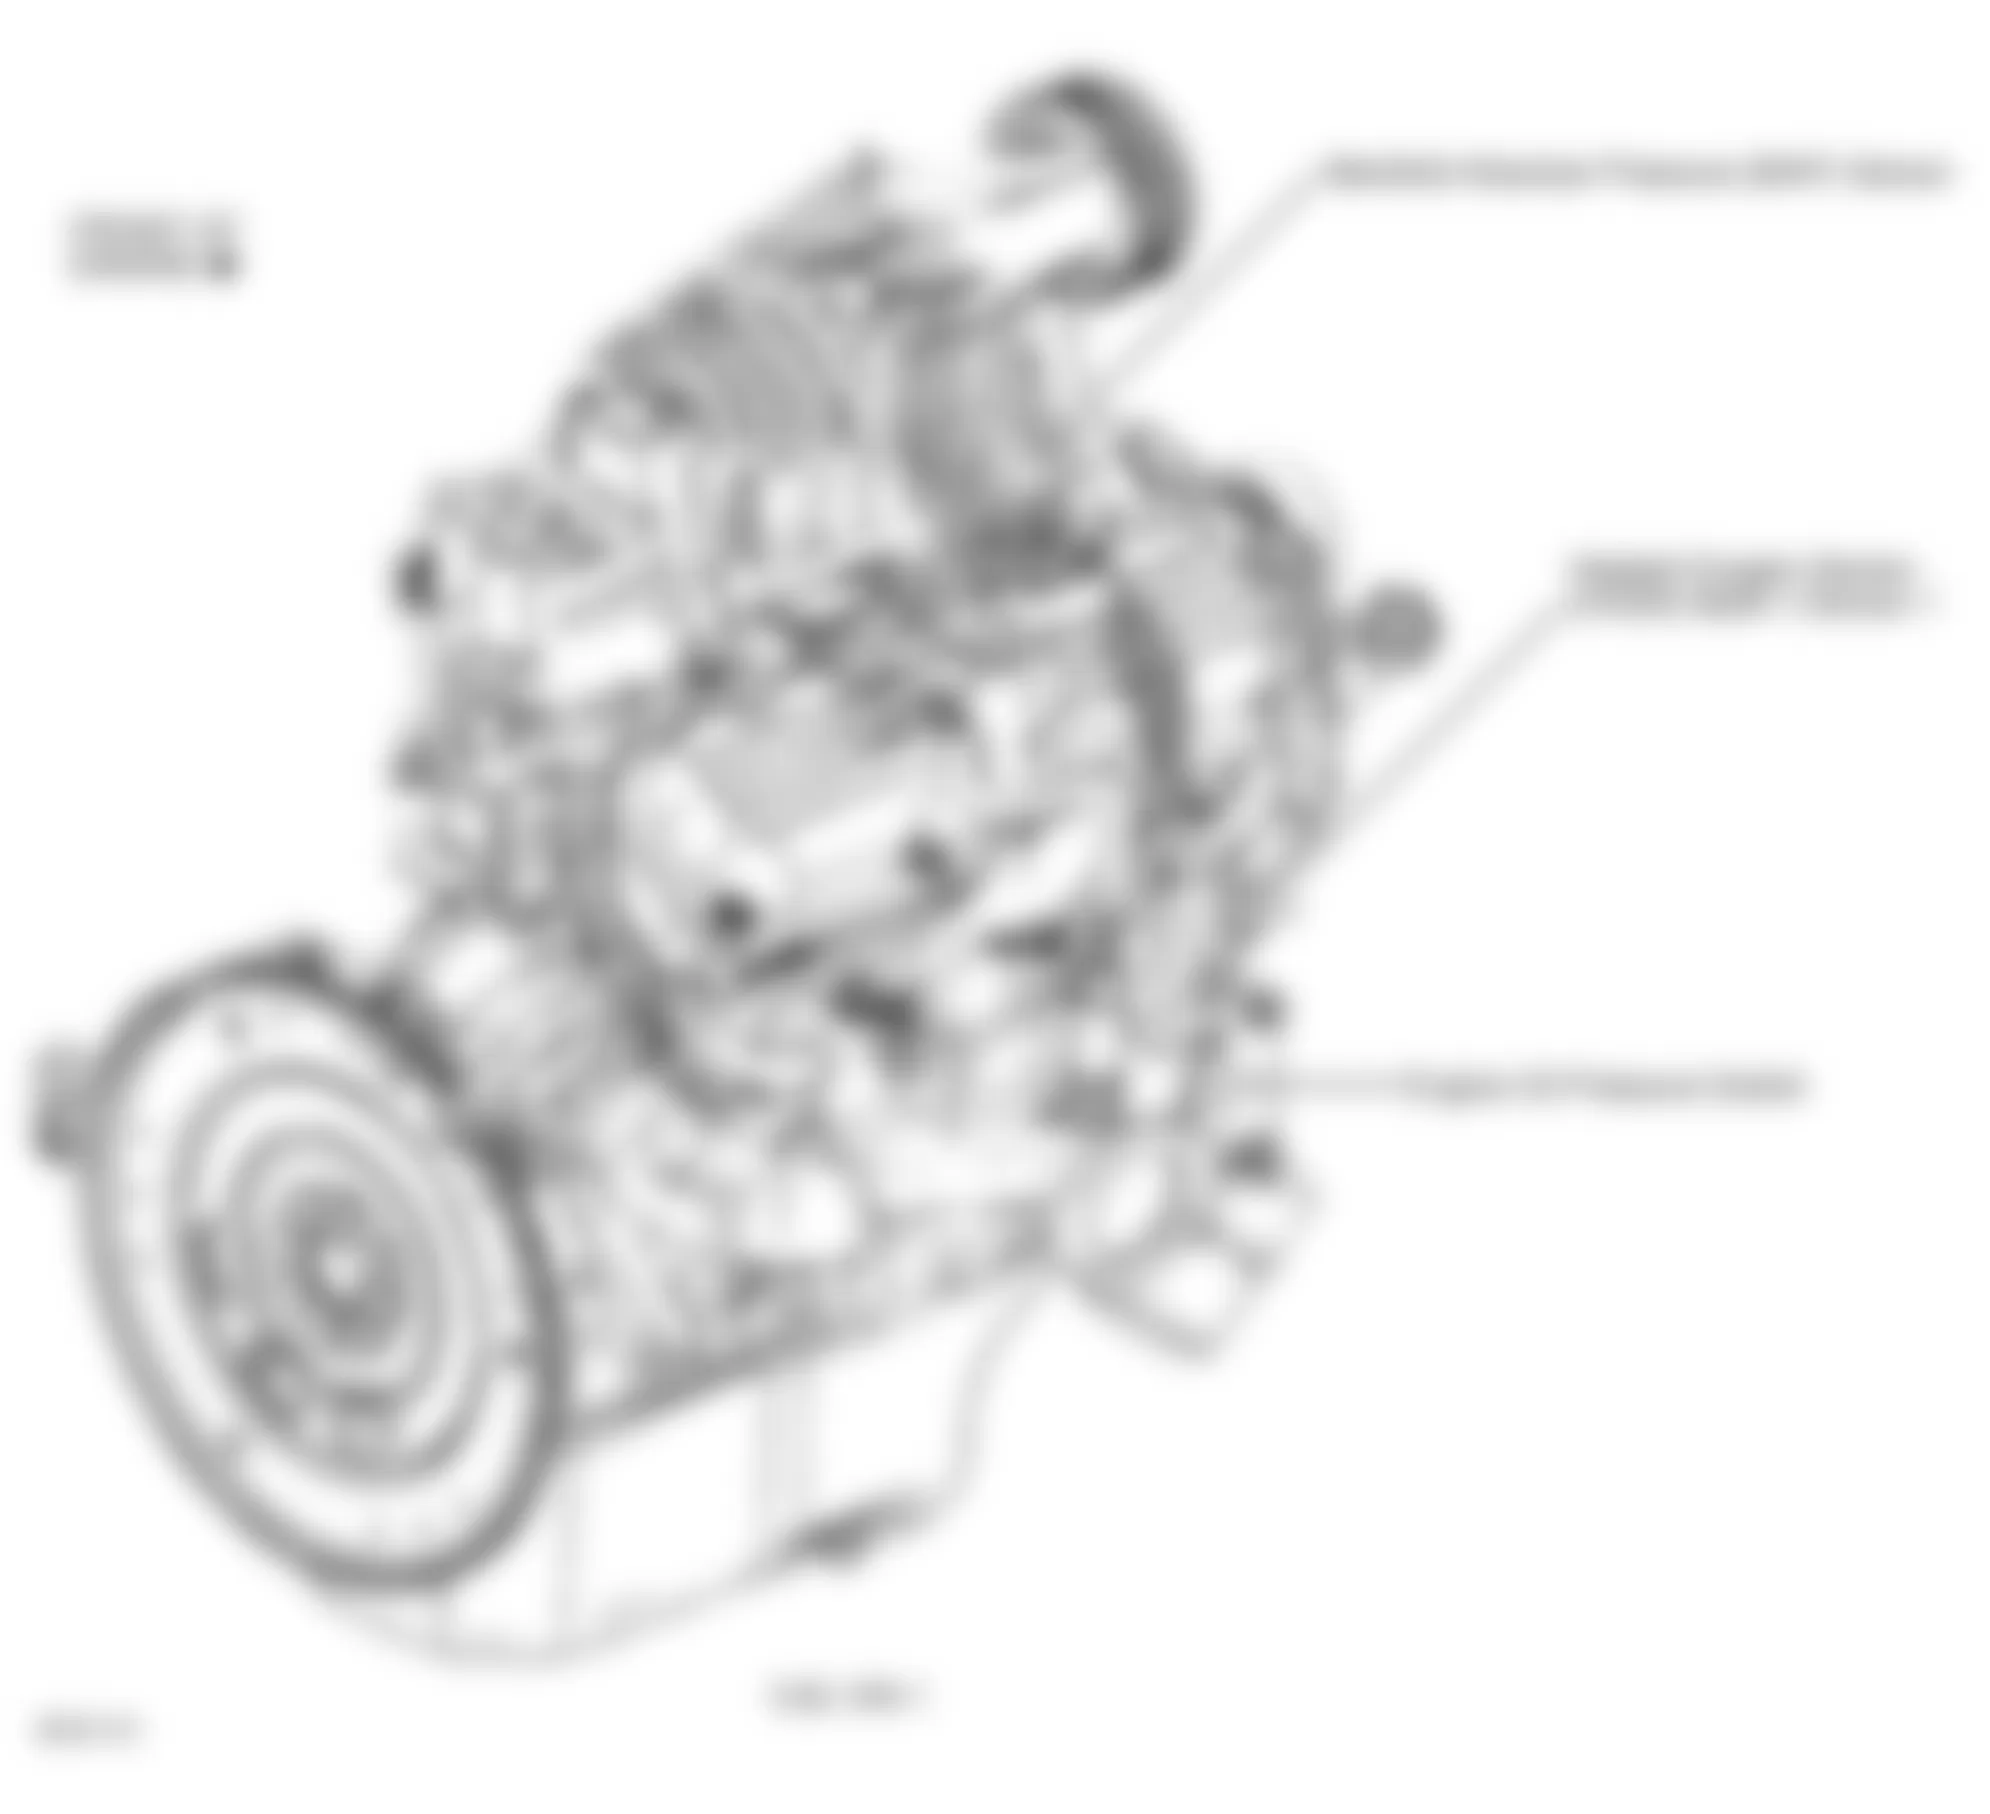 Buick LeSabre Limited 1999 - Component Locations -  Rear Of Engine (3.8L VIN 1)